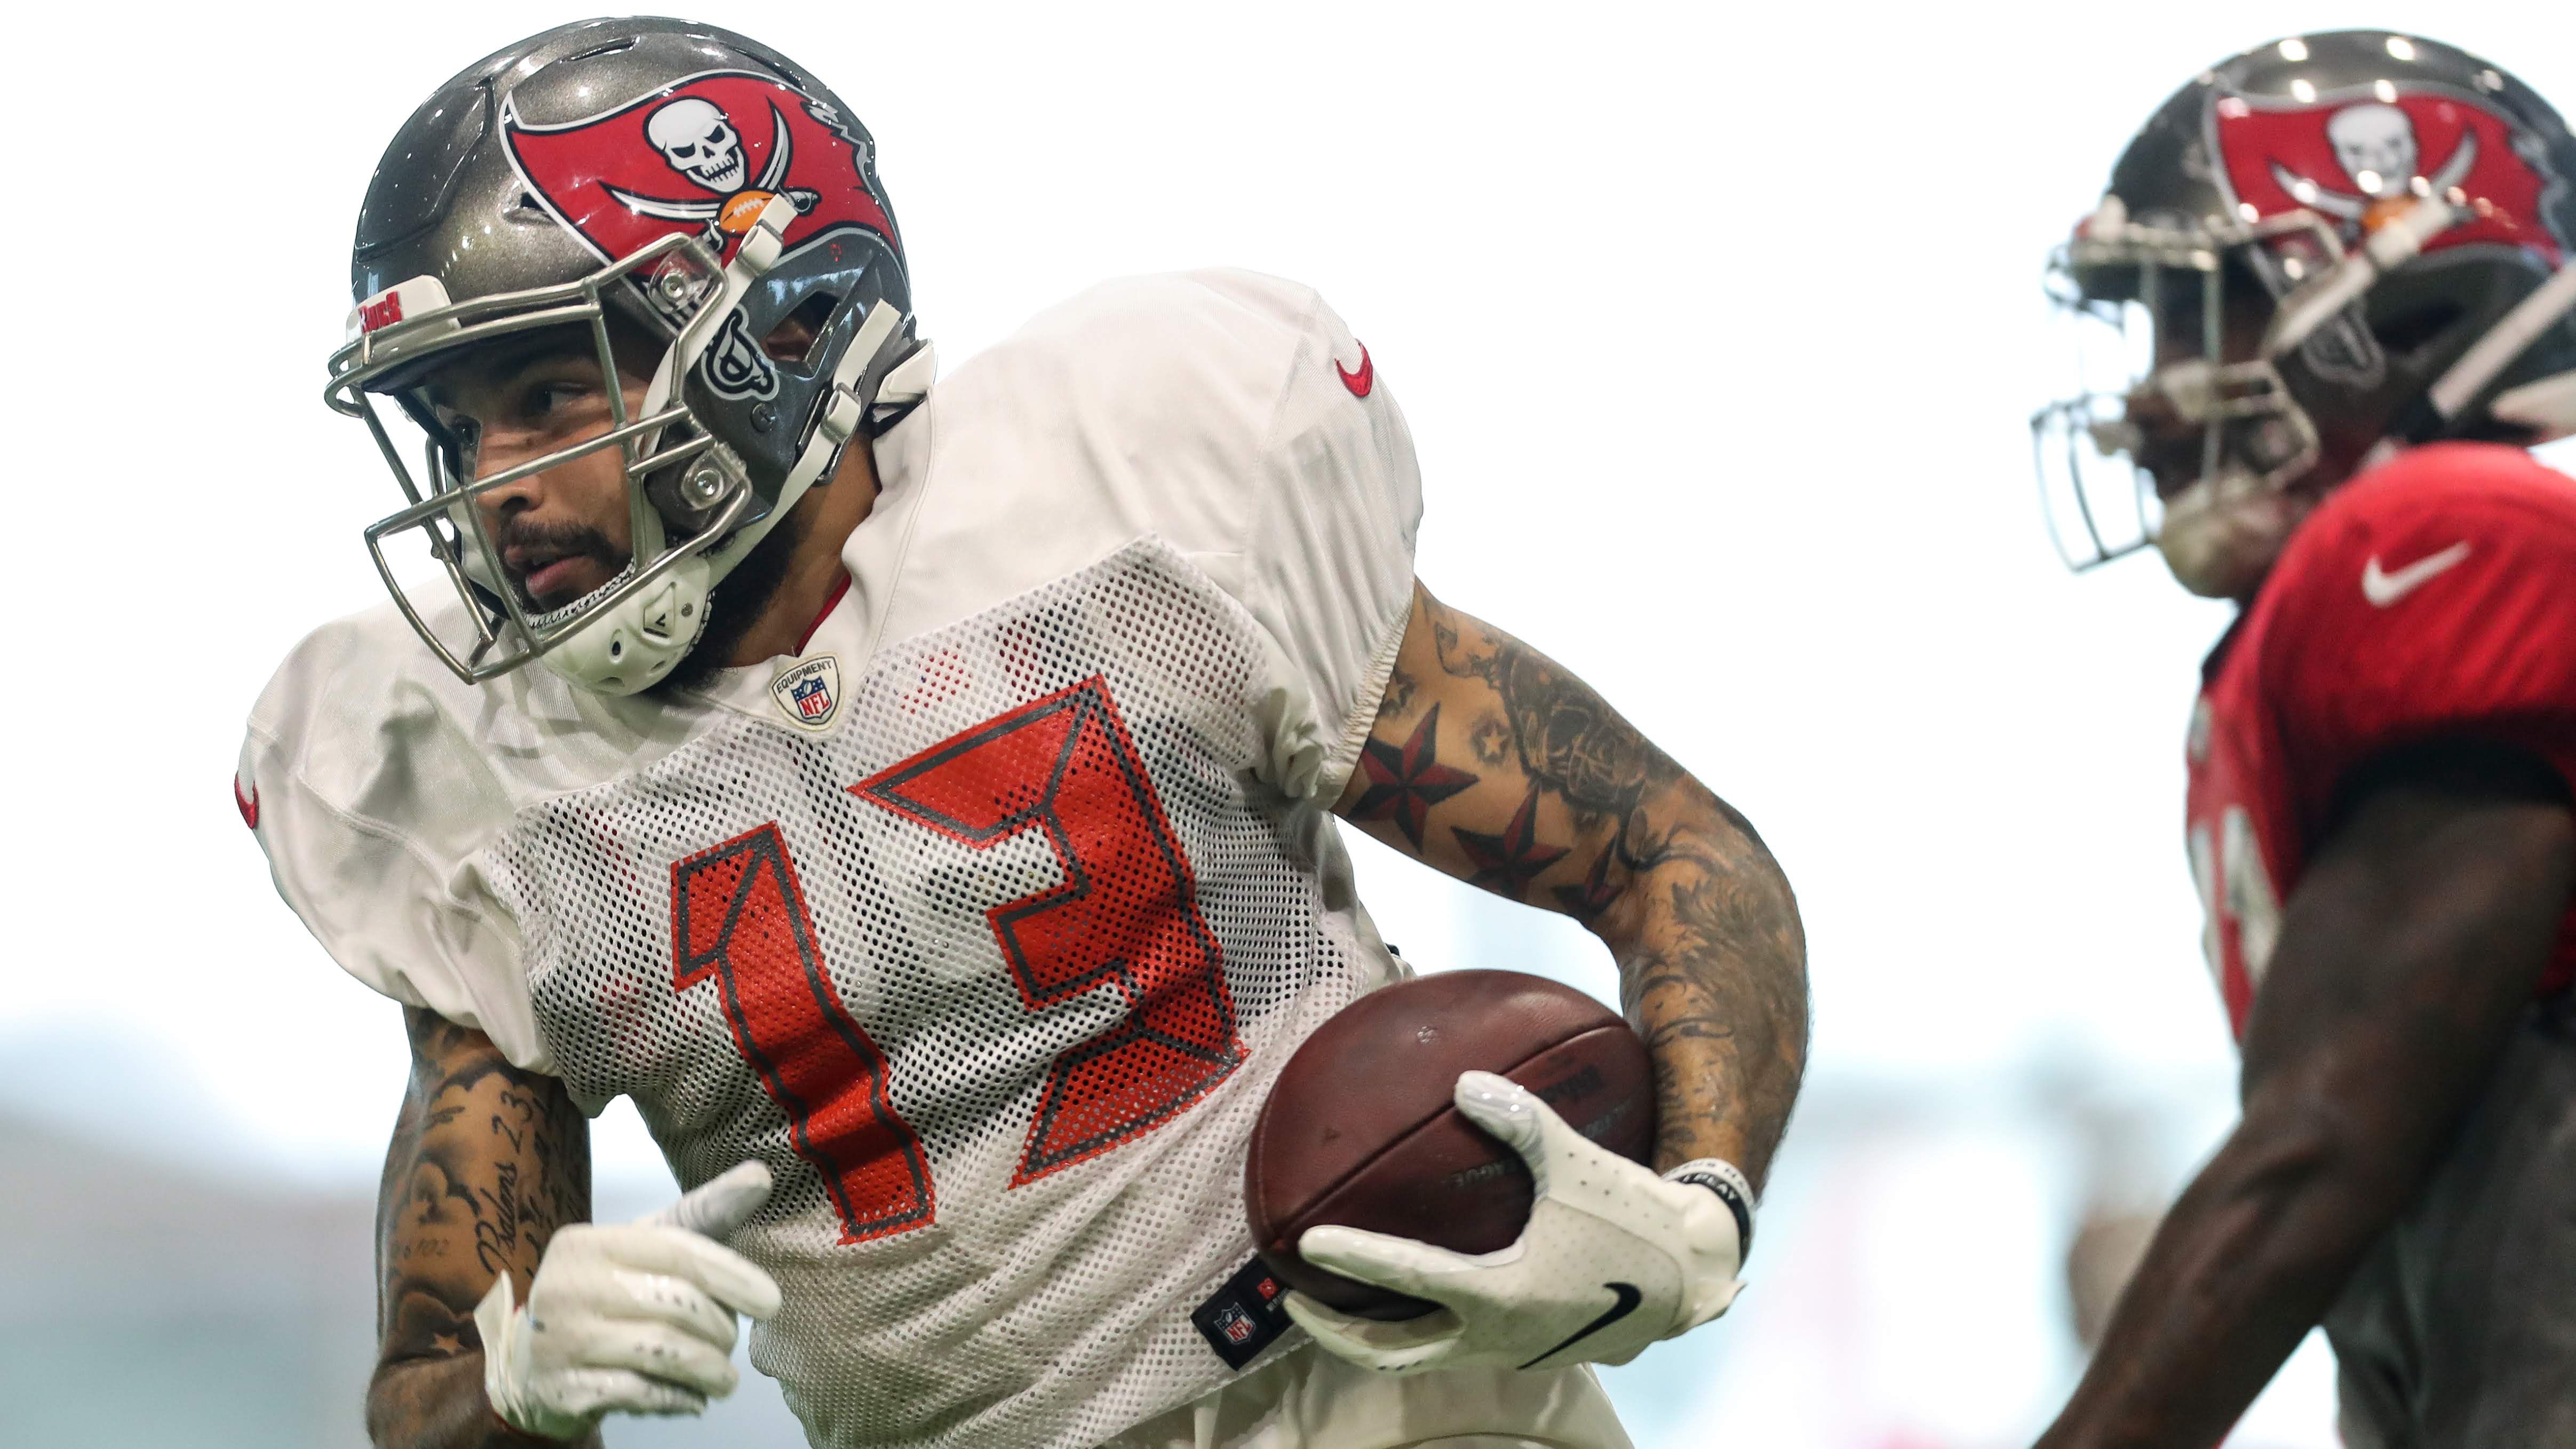 Fantasy football: Where to draft Tampa Bay Buccaneers WR Mike Evans